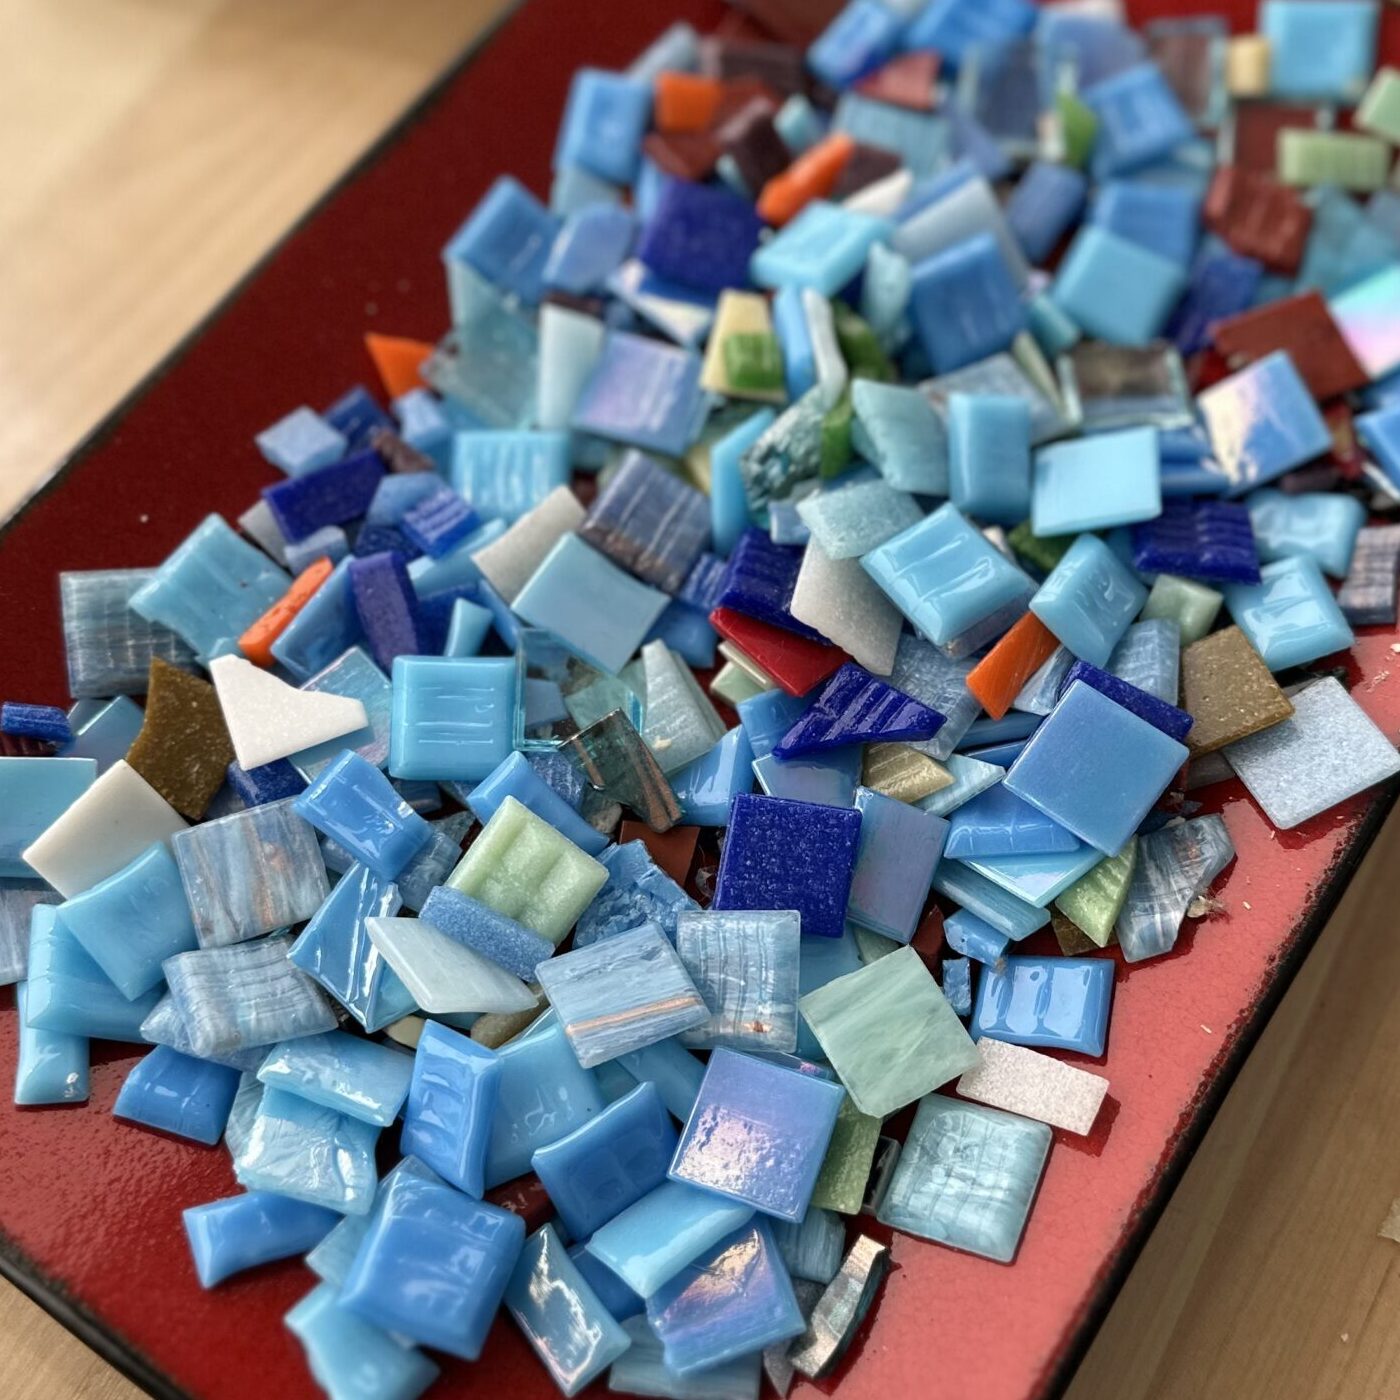 Collection of different shades of blue glass tiles for mosaic.